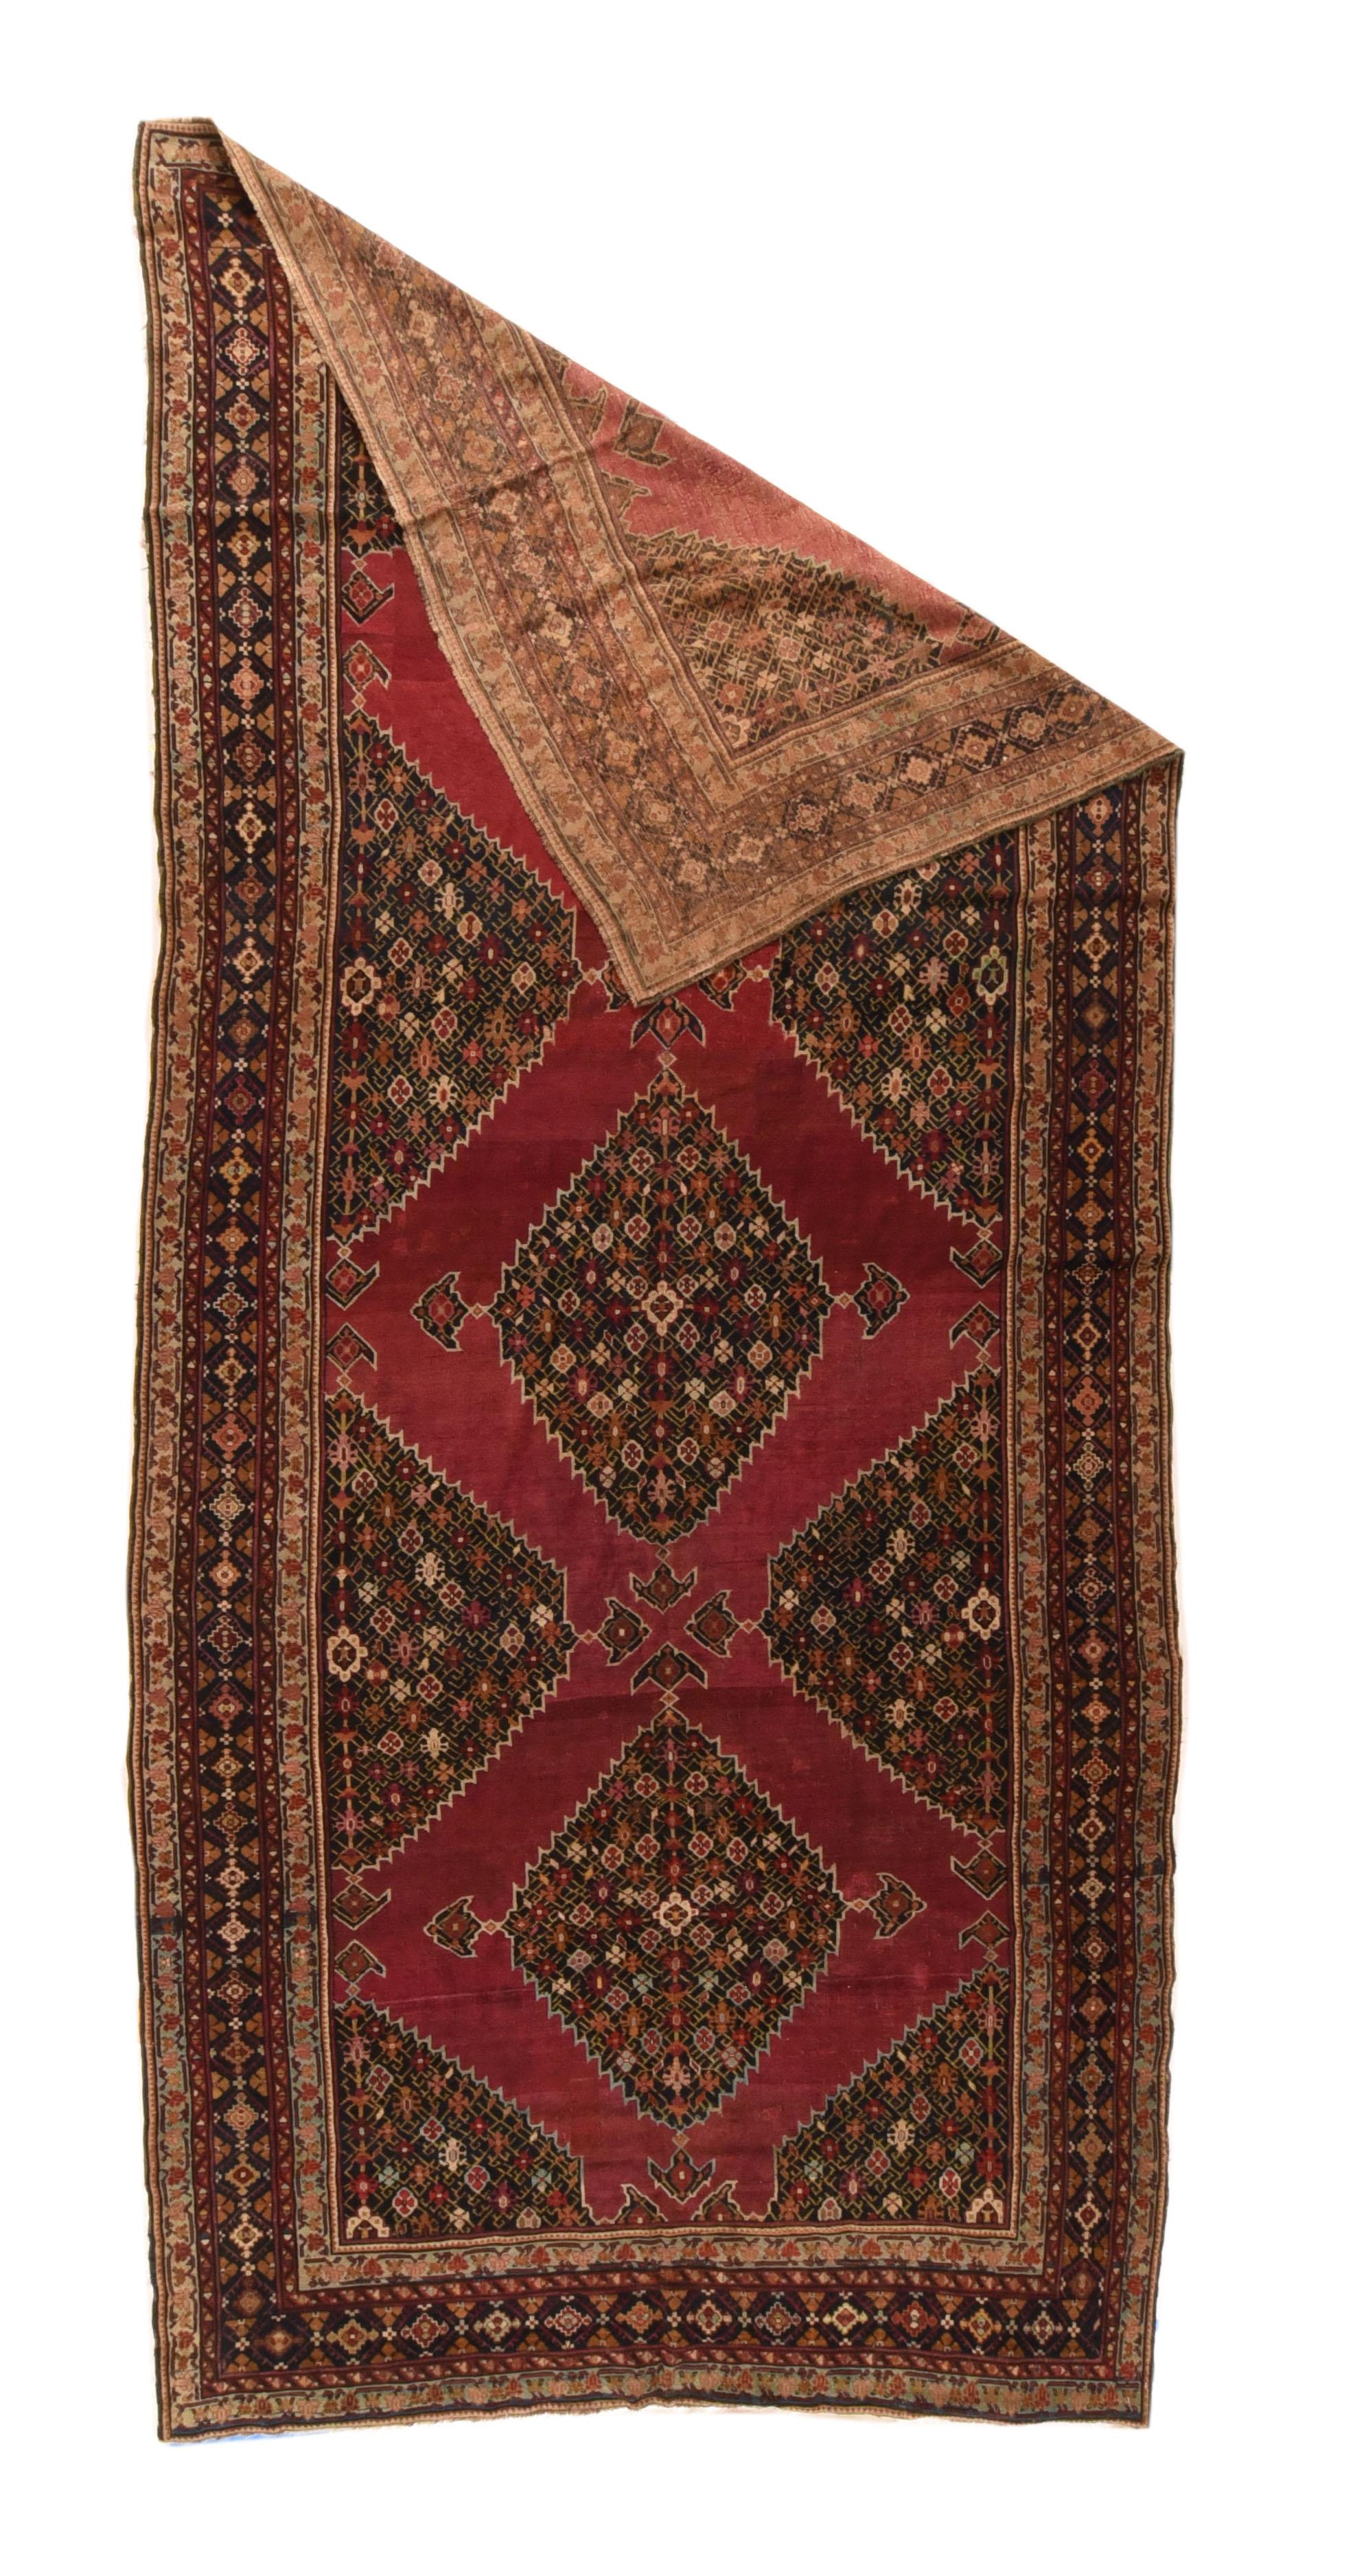 Three complete and eight fractional navy stepped millefleurs hexagonal four pendant medallions float on the plain cochineal scarlet field of this moderately woven, wool foundation south Caucasian workshop carpet, probably from Shusha. Navy border